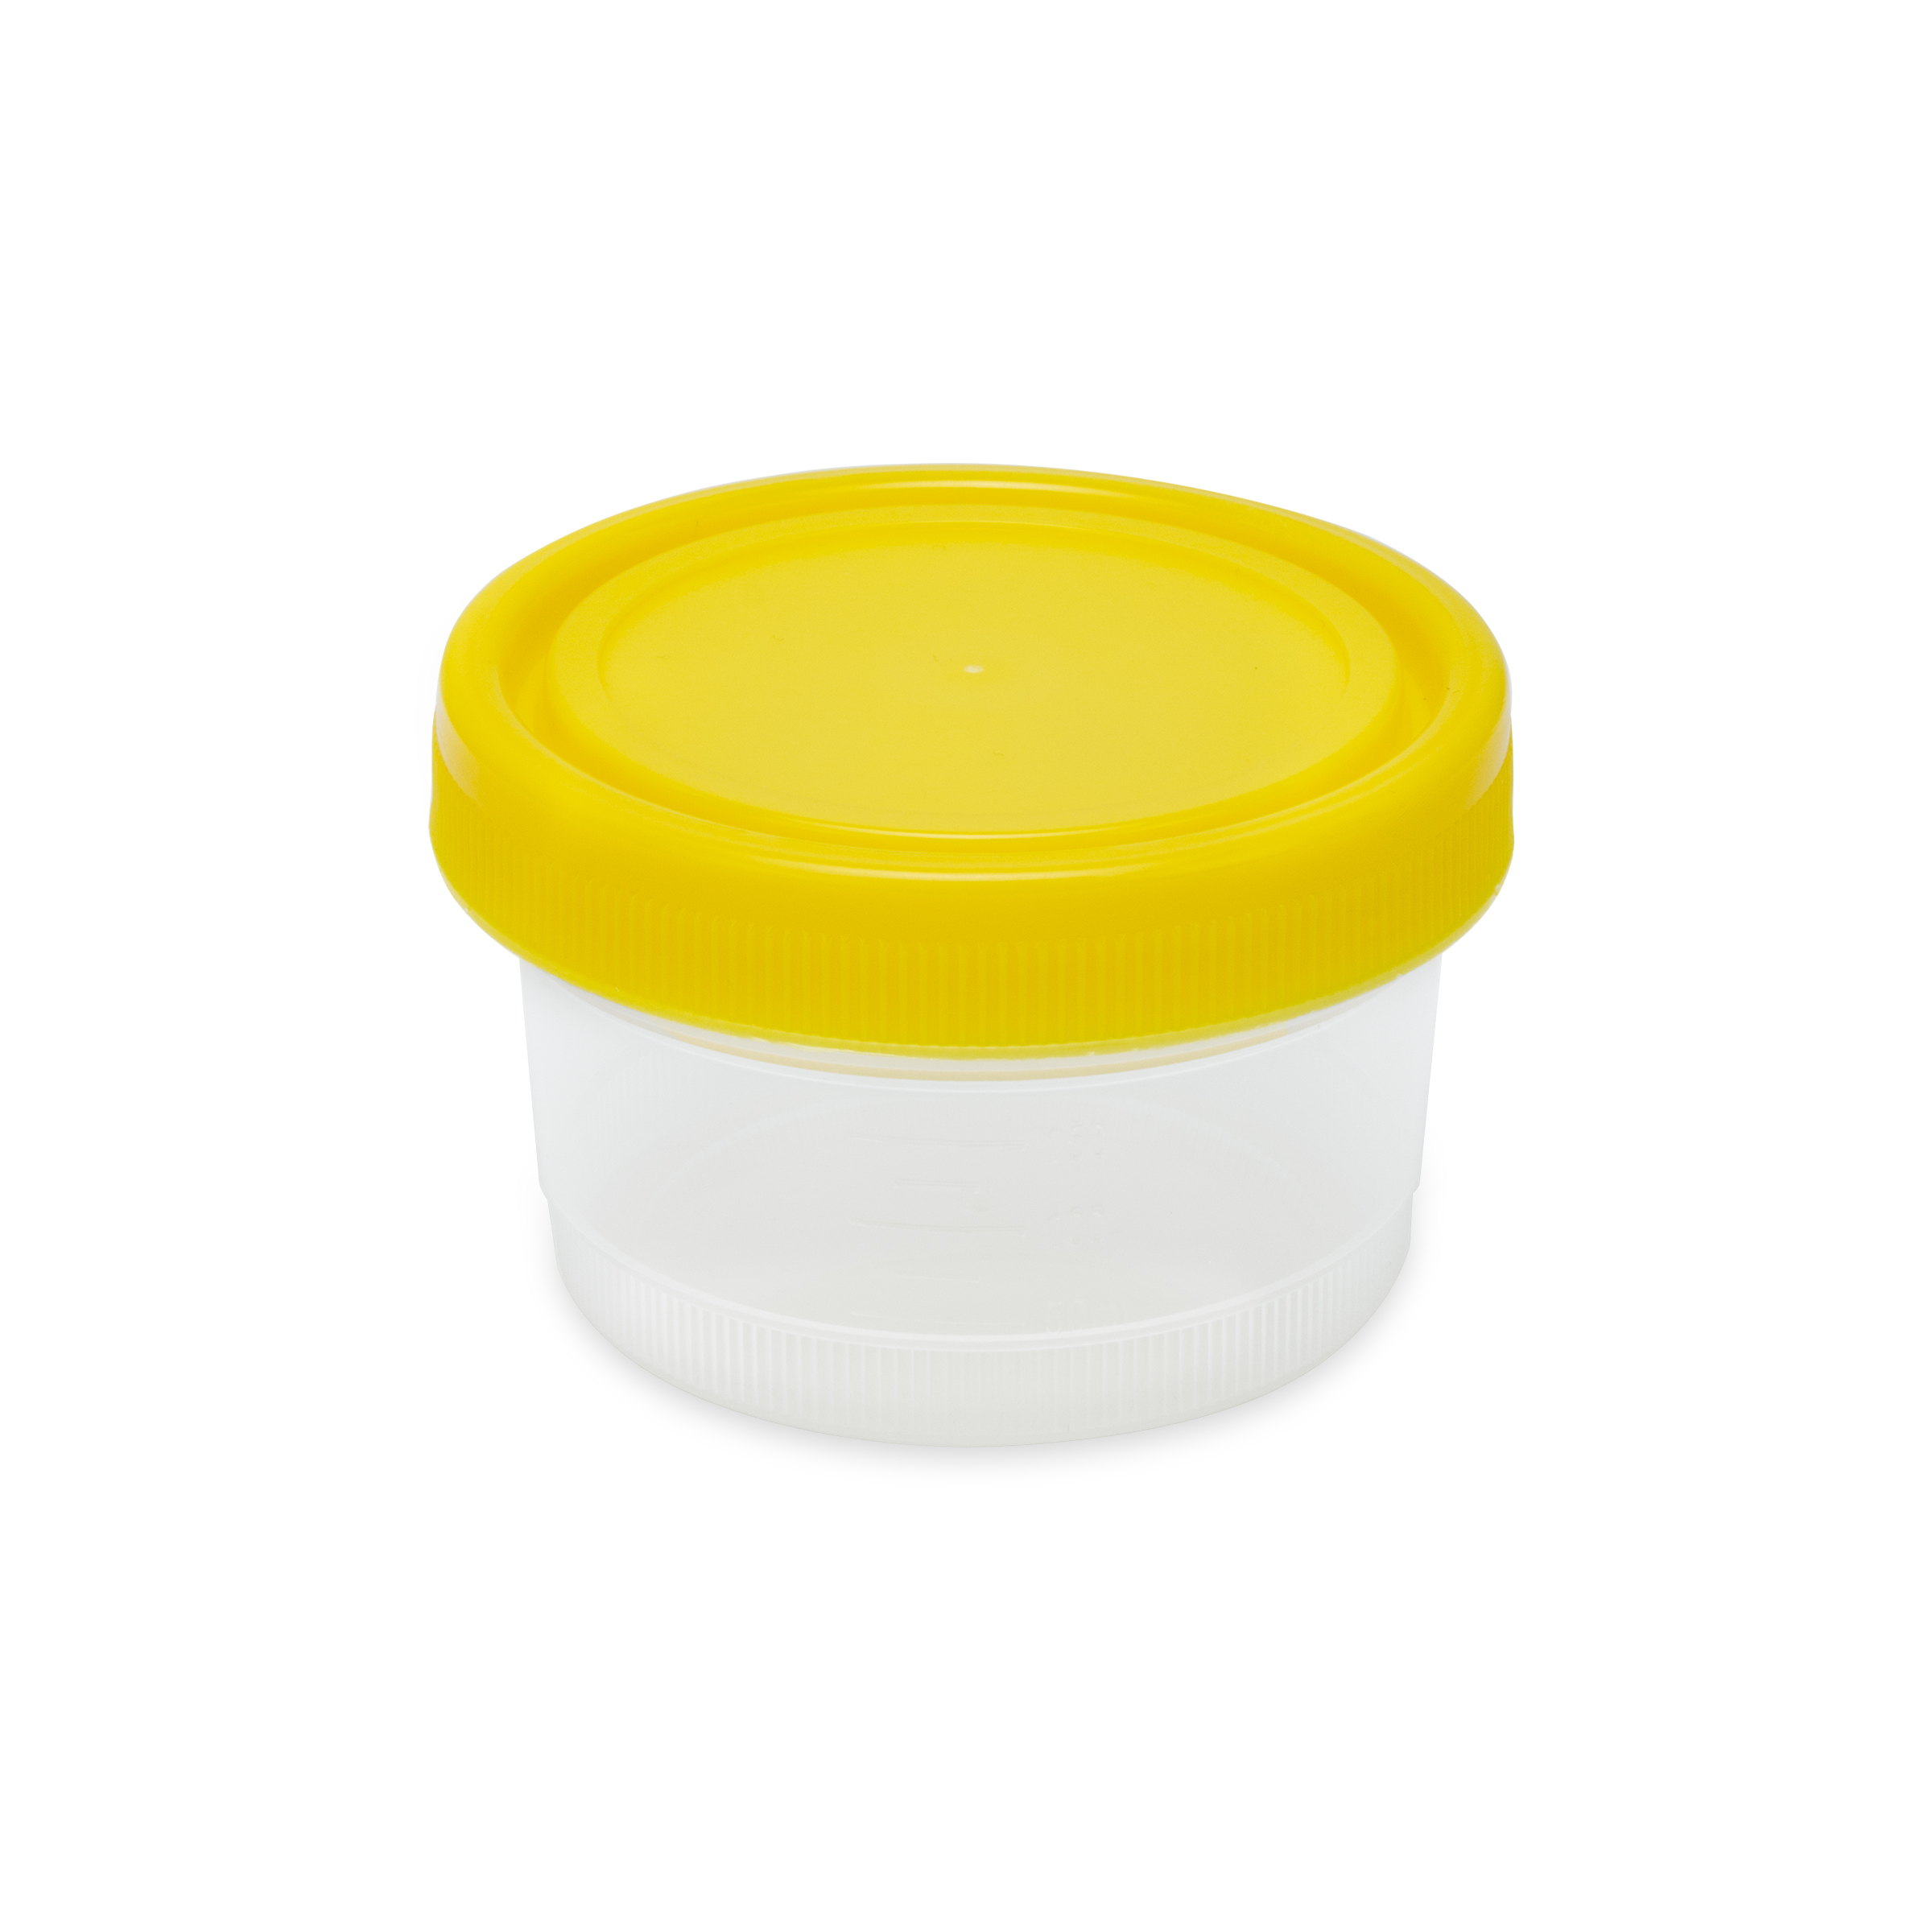 Globe Scientific Container: Histology, 1000mL (32oz), PP, Graduated, with Separate Yellow Screwcap Containers; Extra-Large; Histology